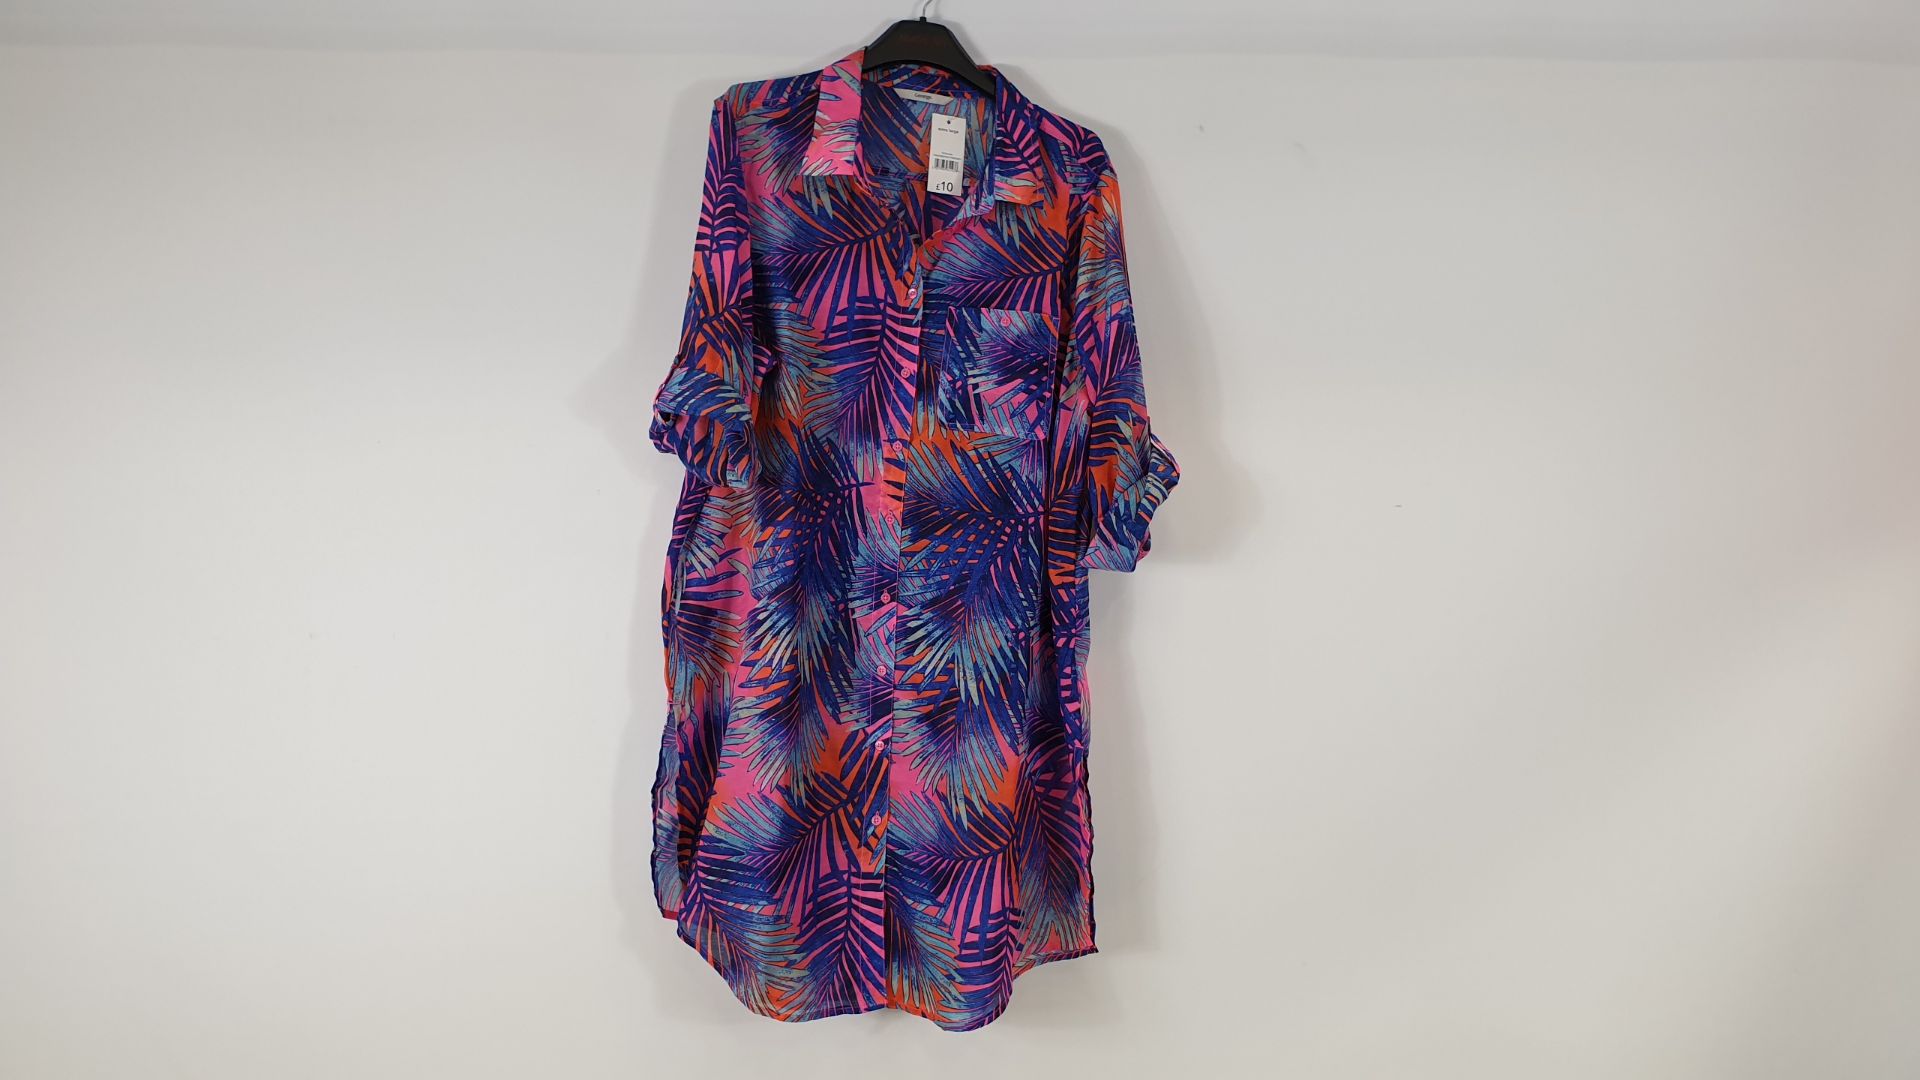 120 X BRAND NEW MULTI COLOURED BEACH SHIRTS BY GEORGE - SIZE L - (28911) RRP £10 EACH - IN 2